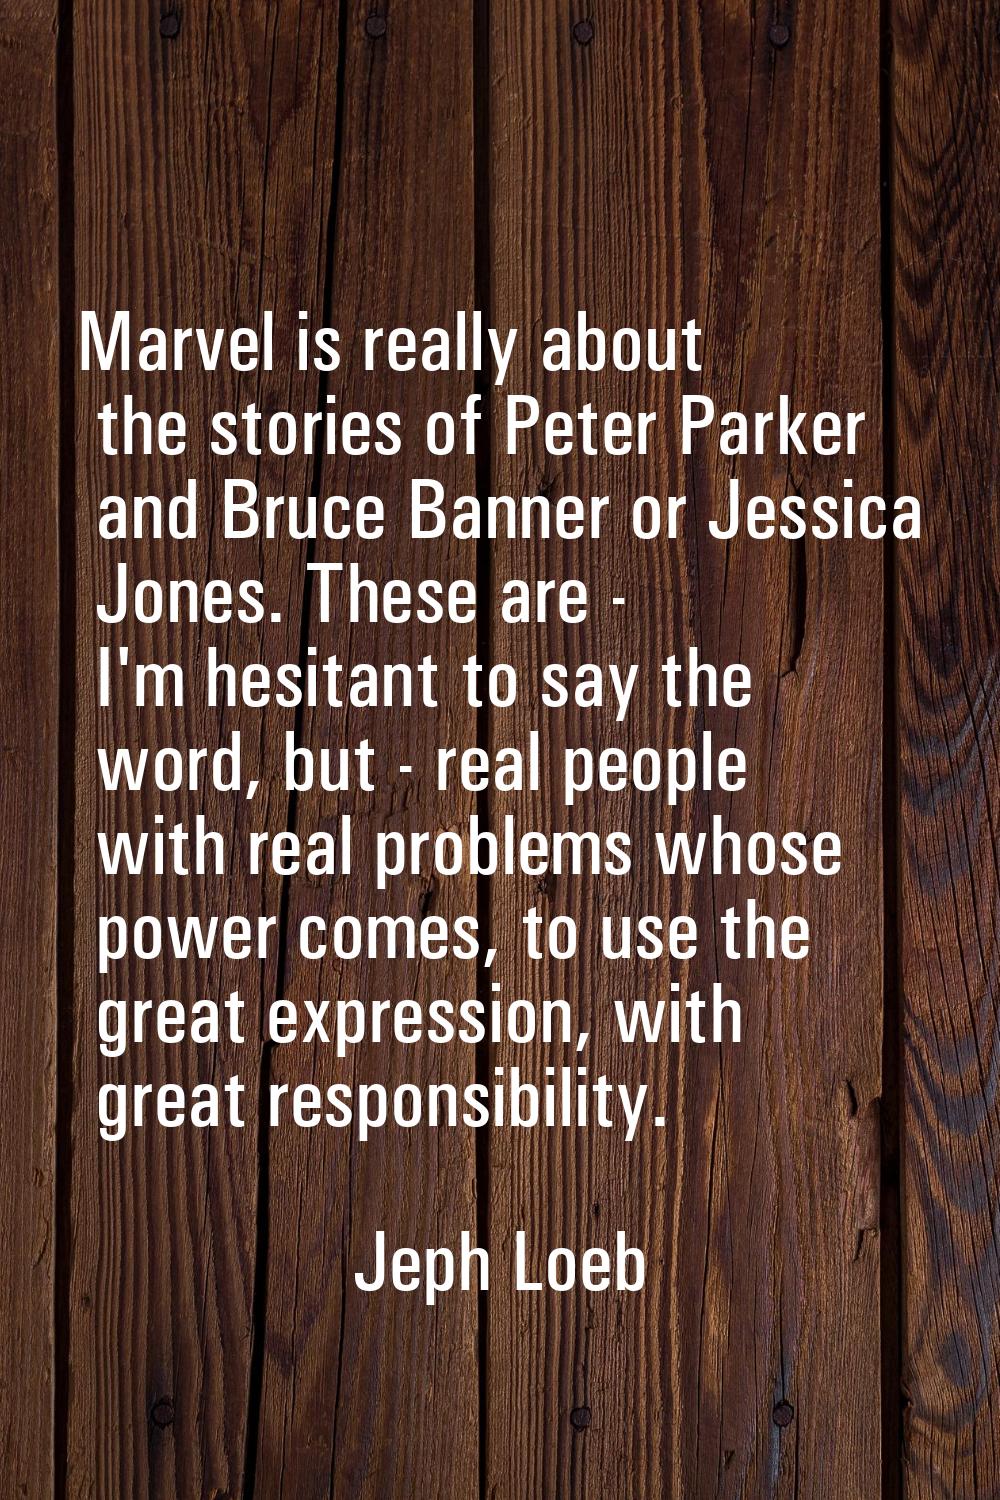 Marvel is really about the stories of Peter Parker and Bruce Banner or Jessica Jones. These are - I